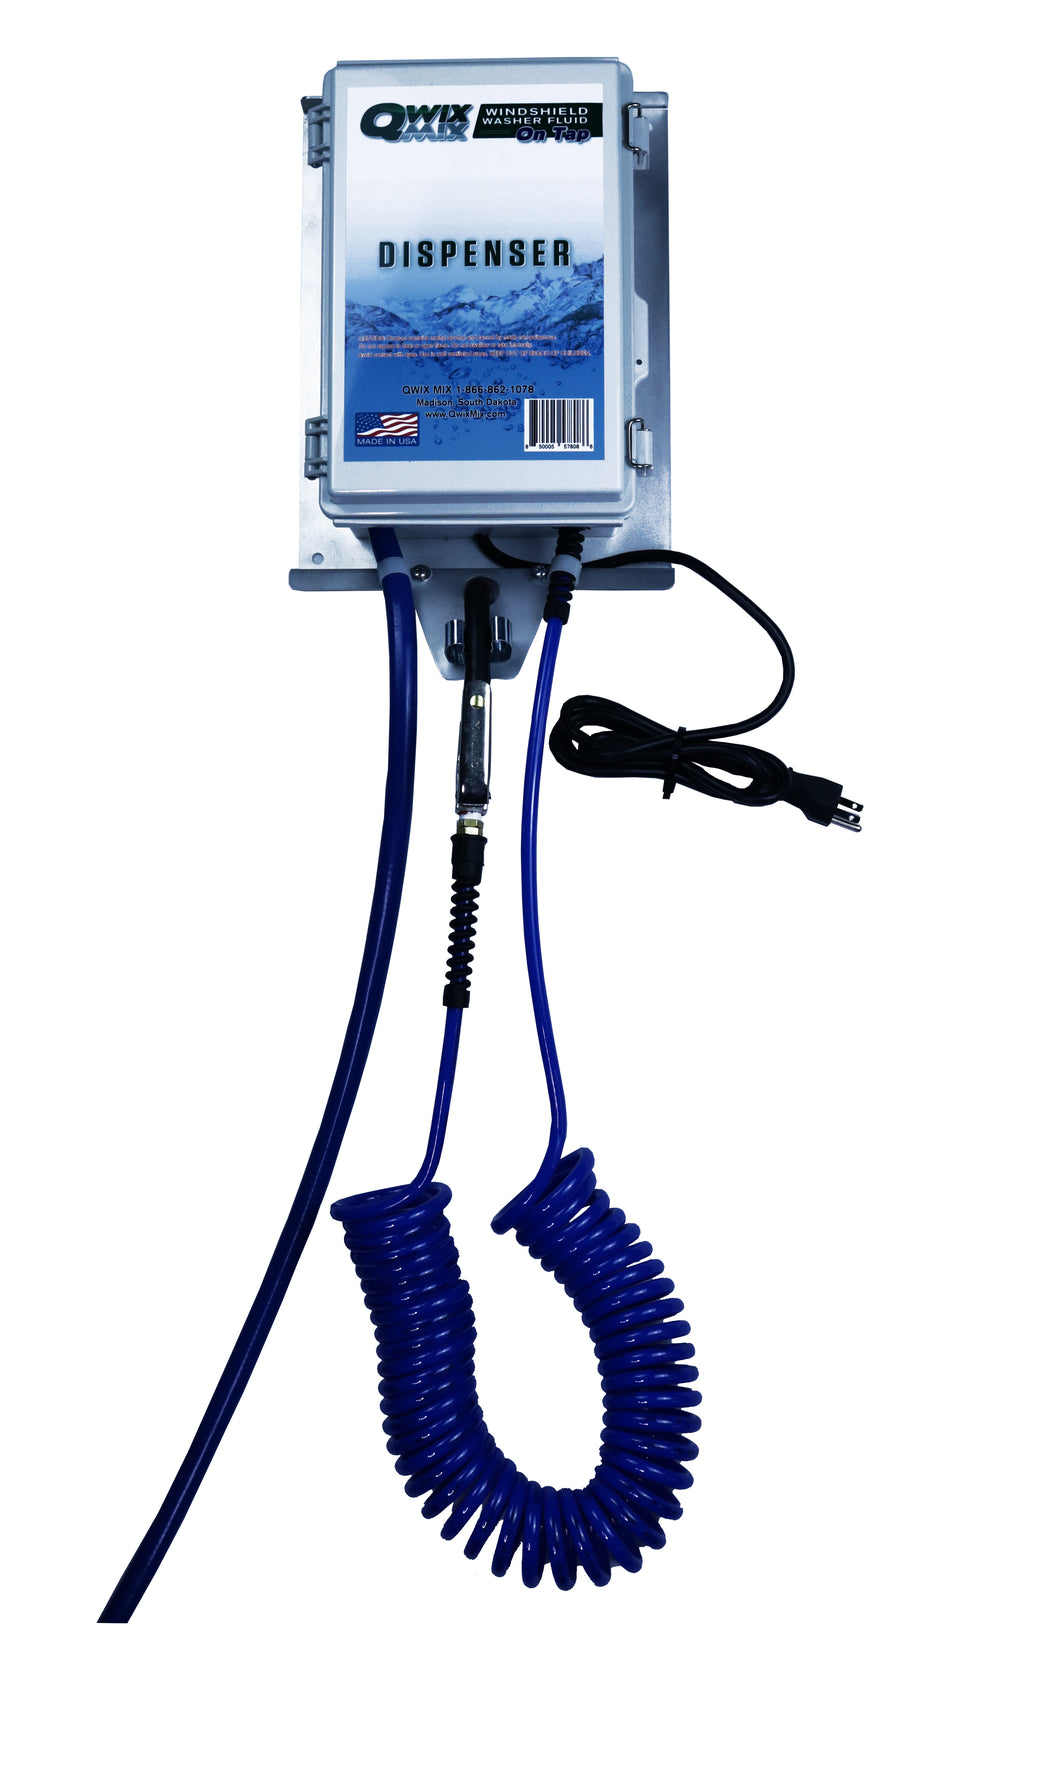 Qwix Mix Outdoor Windshield Washer Fluid Wall Mounted Dispenser For Dispensing From a 55 Gallon Drum, Tote or Tank.